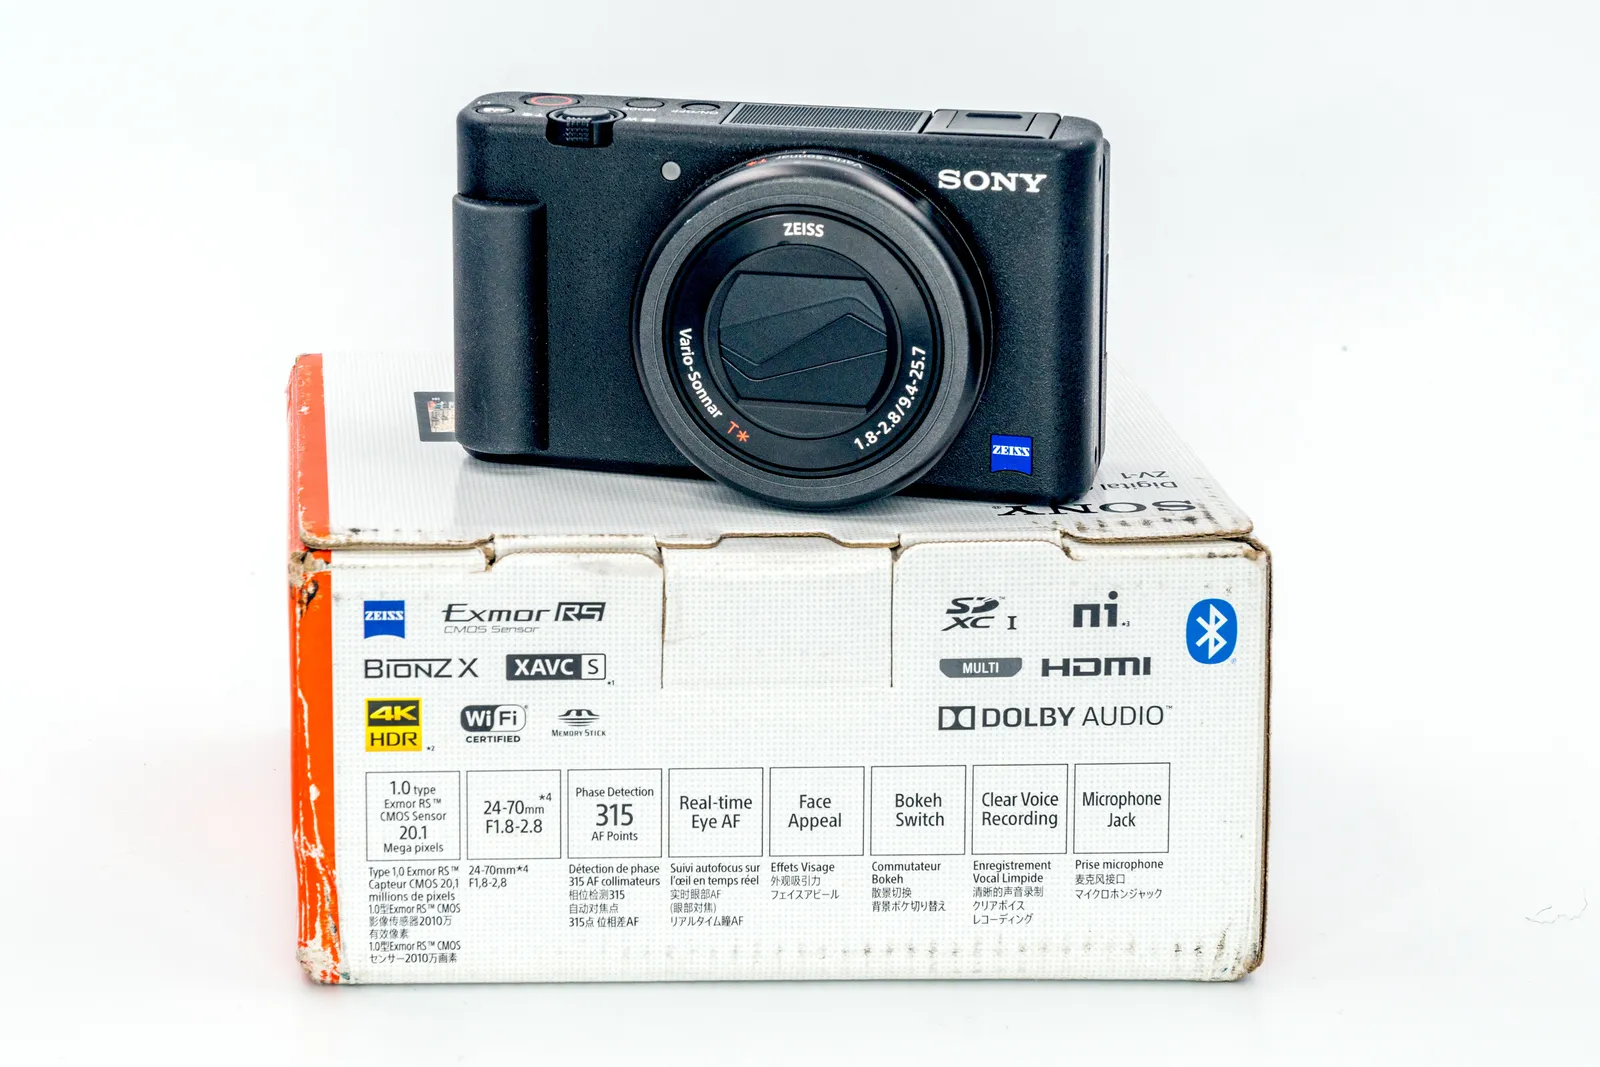 Sony ZV-1 Digital Camera for Content Creators, Vlogging and